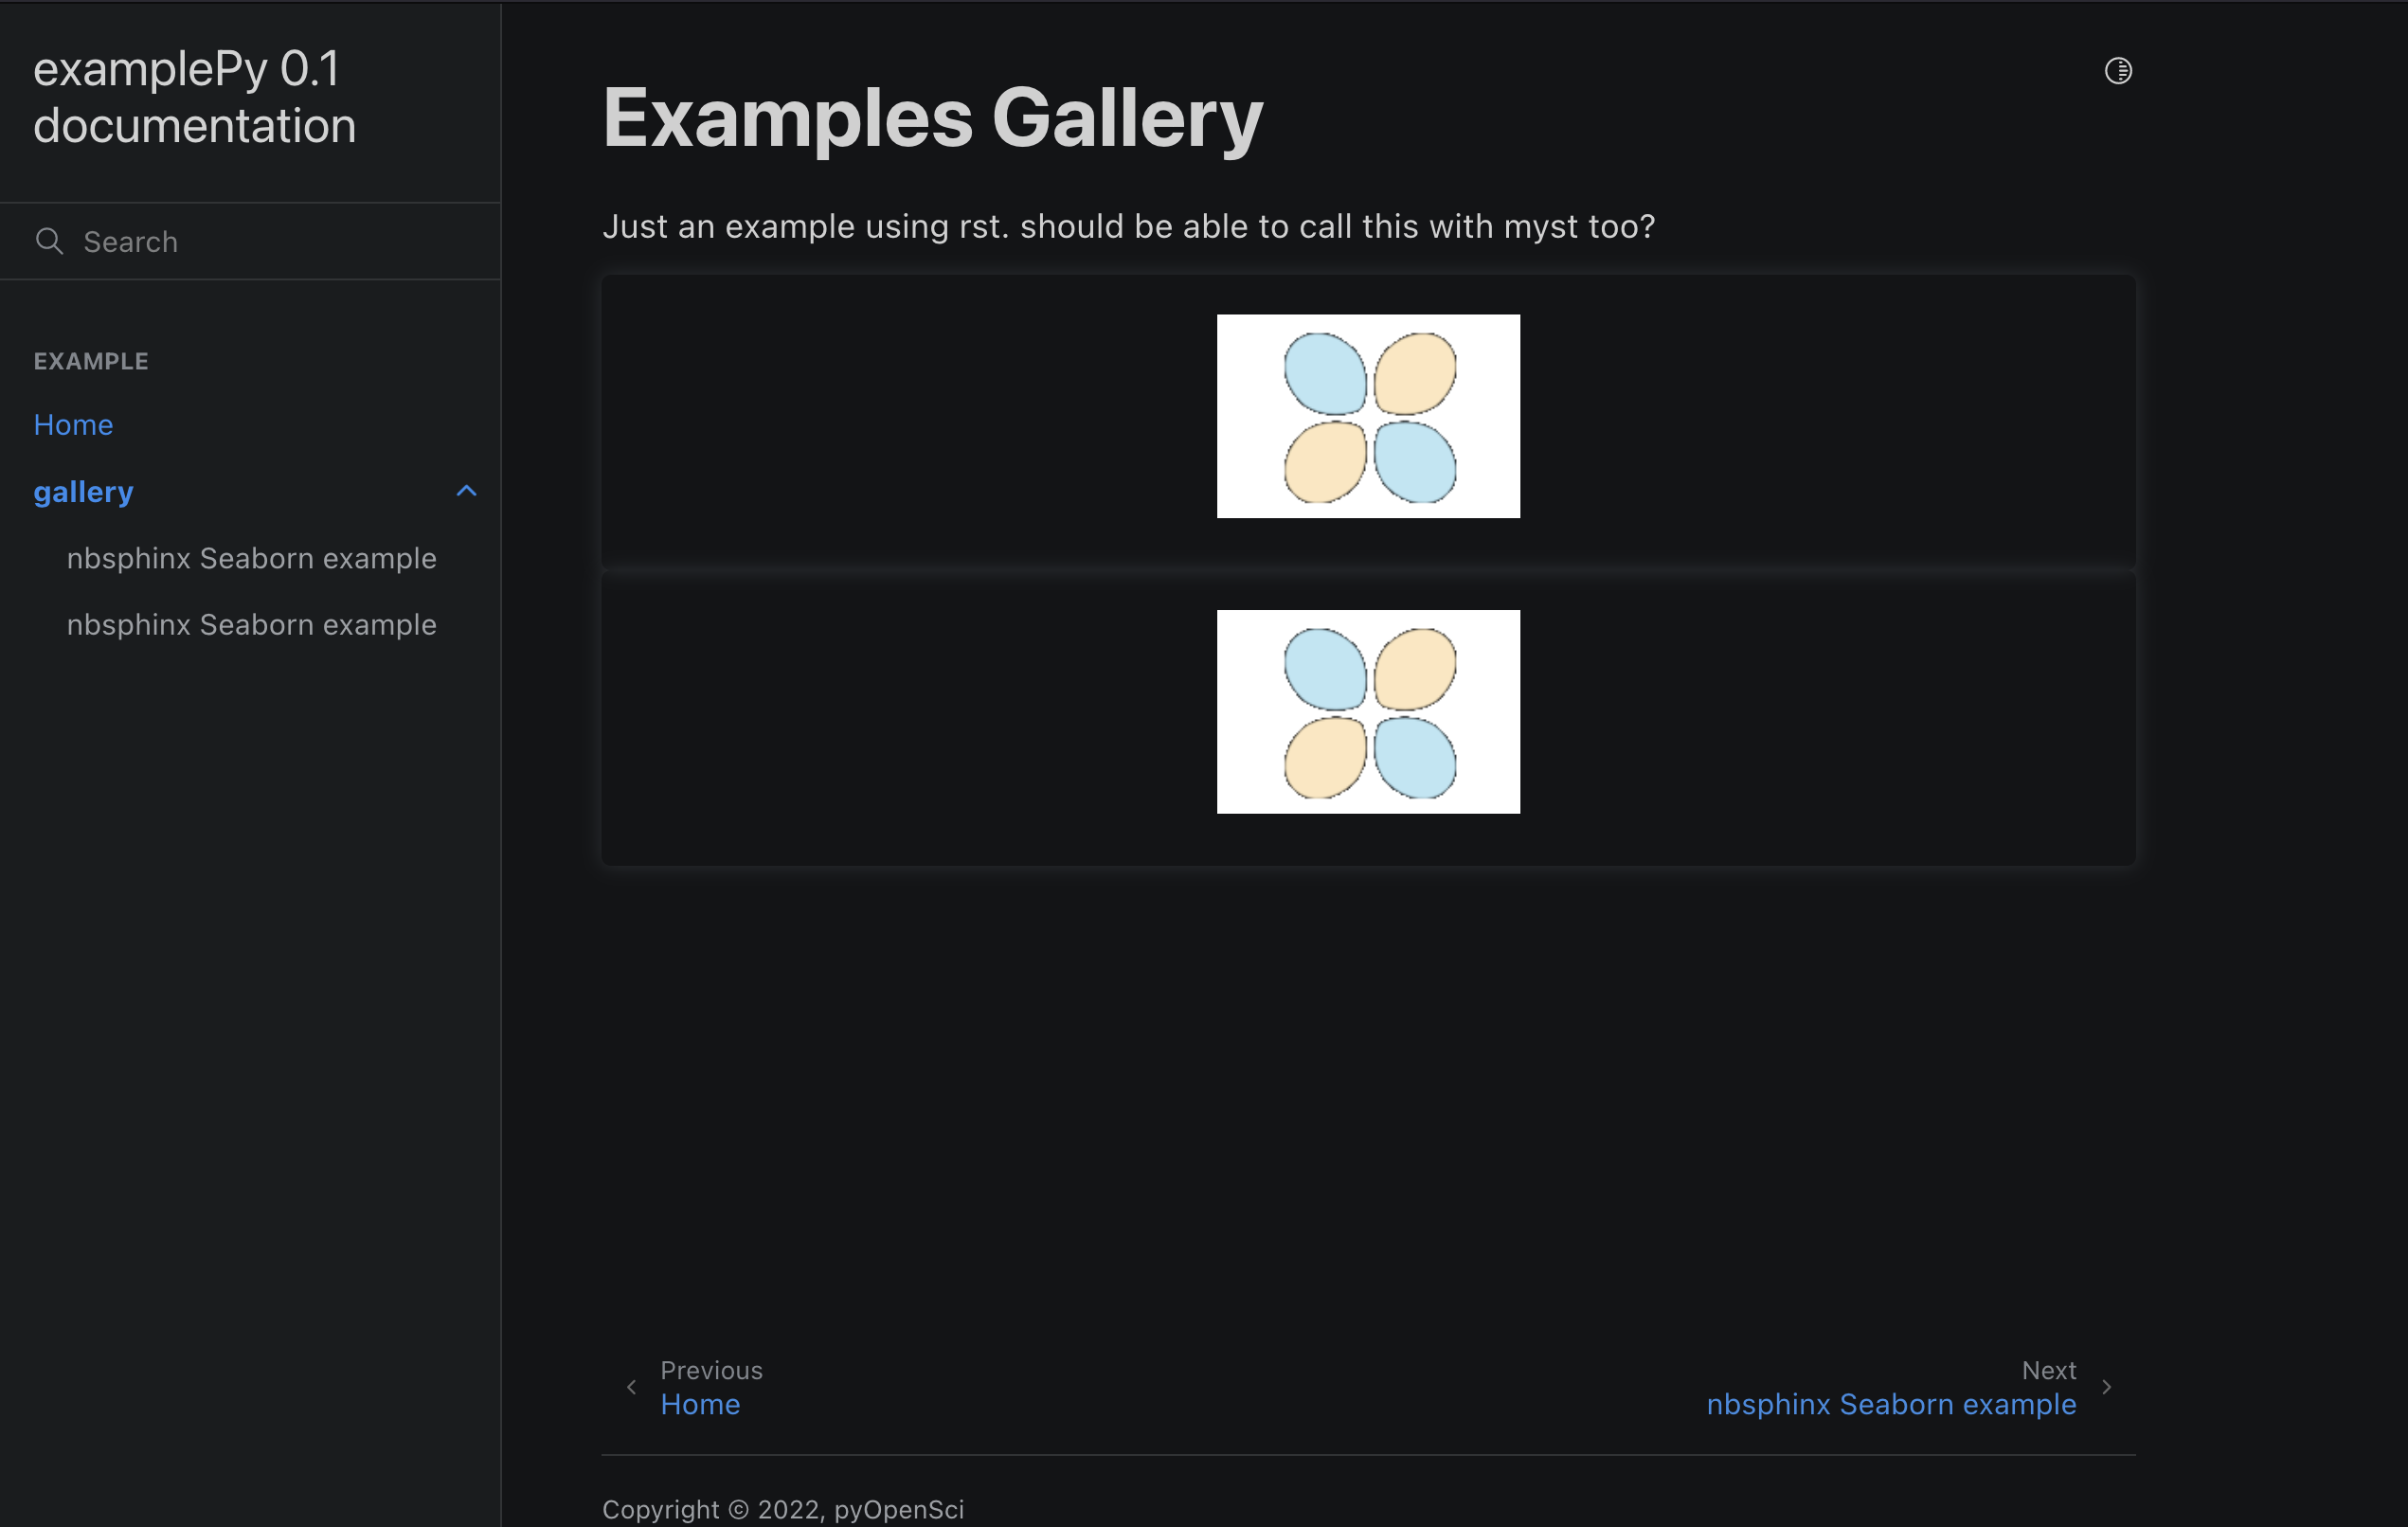 Image showing the gallery output provided by nbsphinx using the sphinx-gallery front end interface.